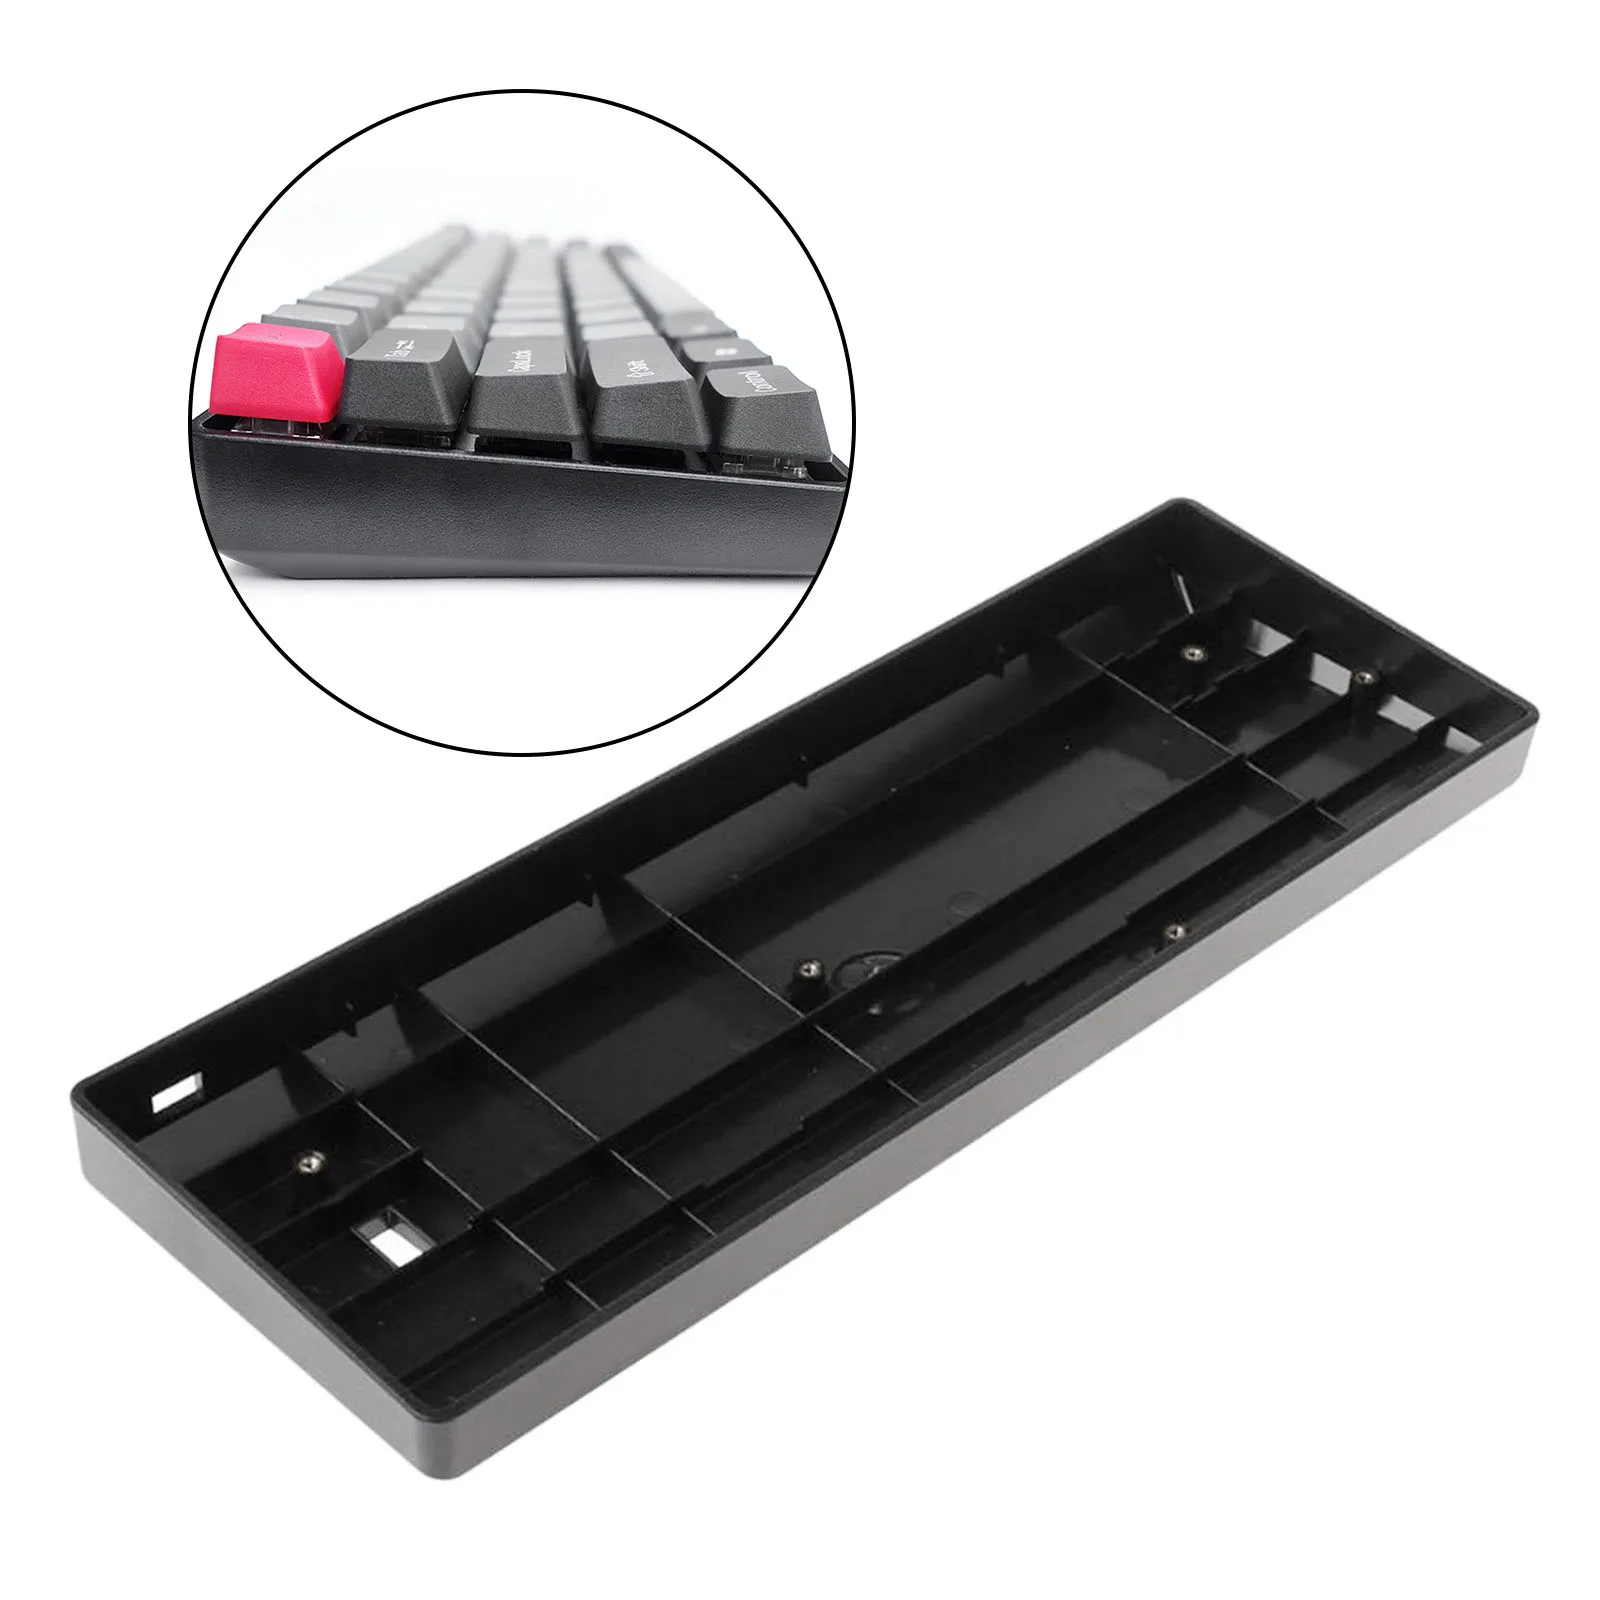 DIY 60% Plastic Shell Base Keyboard Case Frame Compatible with GH60 POKER2 FACEU